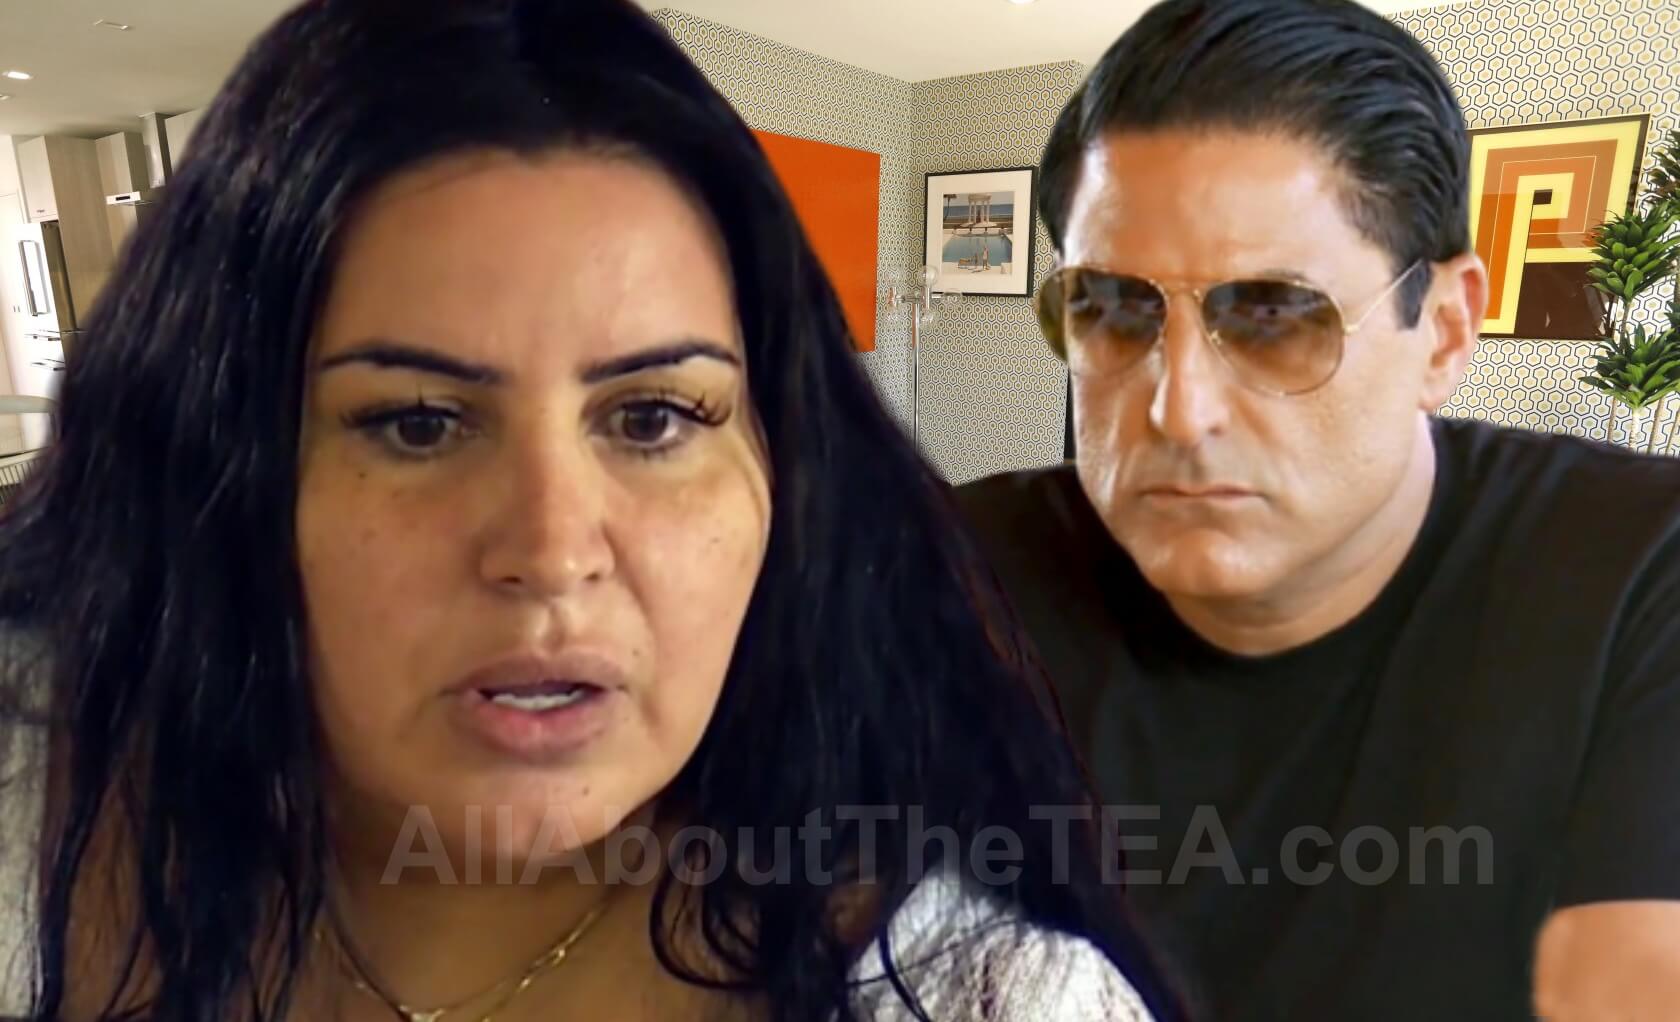 REVEALED! How MJ BETRAYED Best Friend Reza Farahan To Save Her ‘Shahs of Sunset’ Job! Read EXPLOSIVE Texts (EXCLUSIVE)